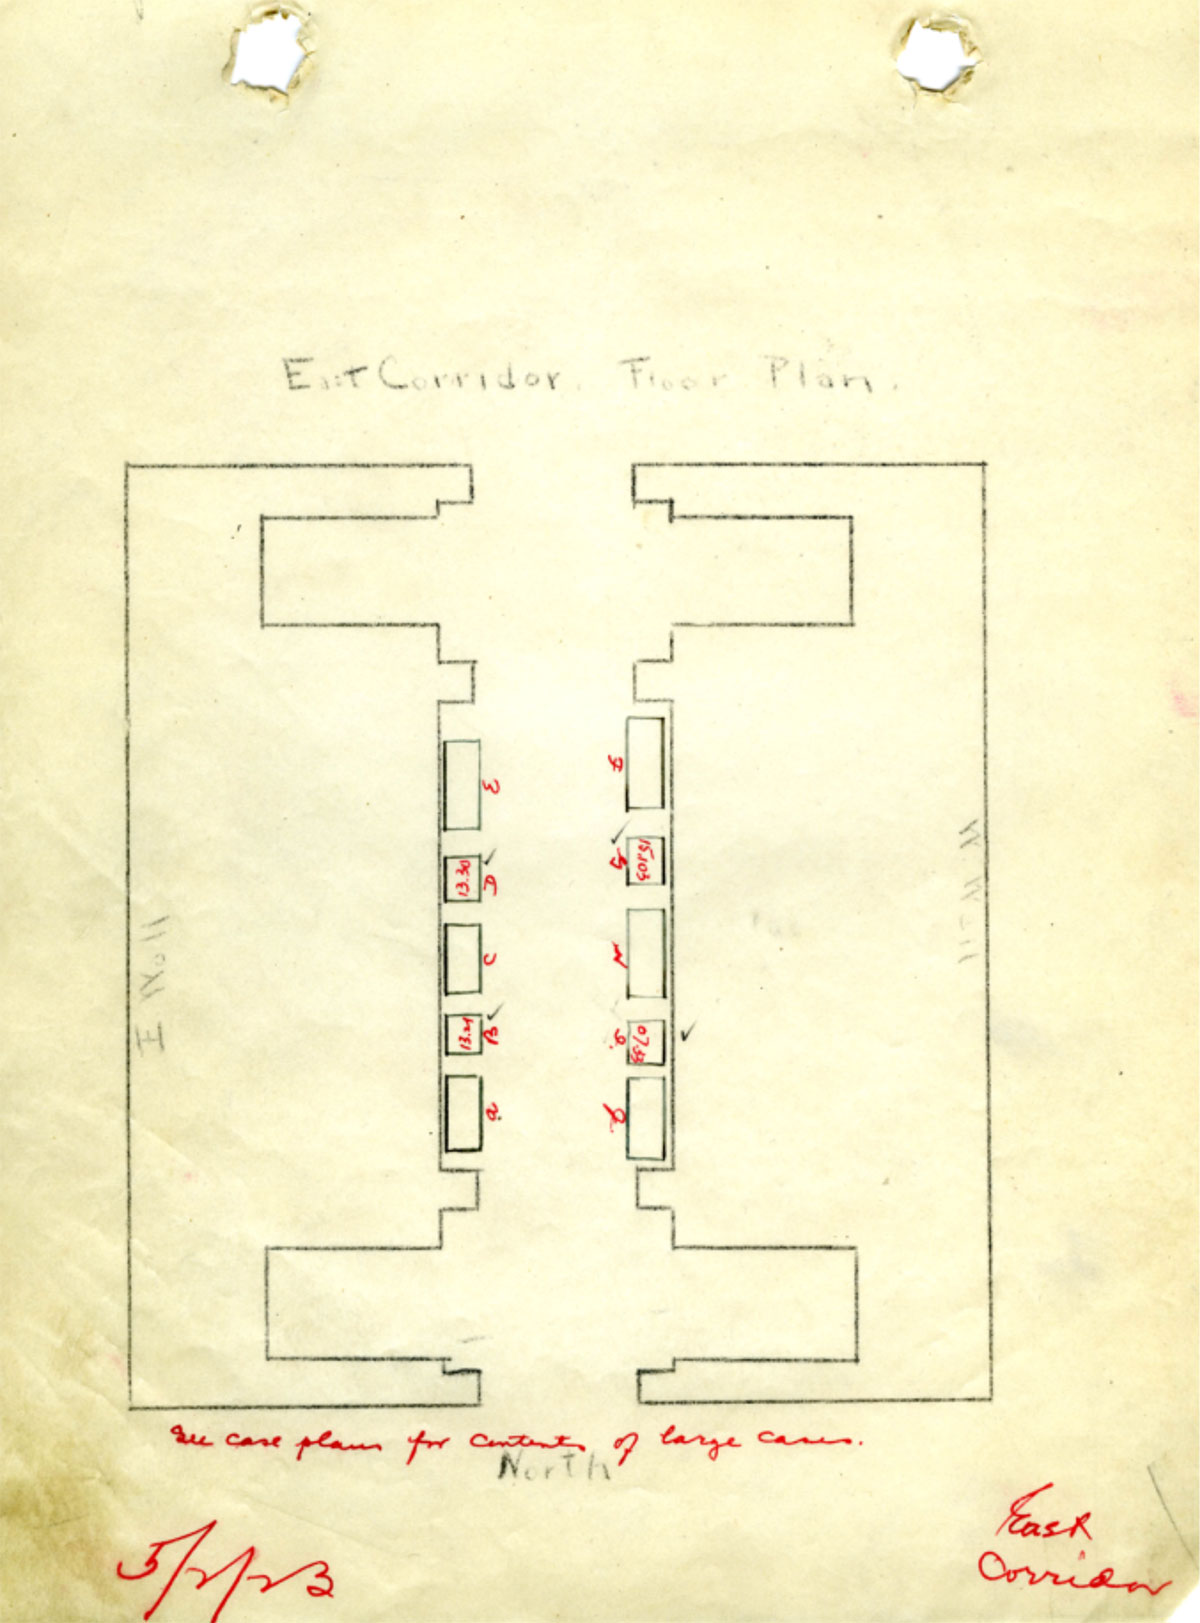 Fig. 6 Installation plans for four cases of jades (A, E, F, J) and two cases of bronzes (C, H) in the inaugural display of Chinese antiquities in the East Corridor of the Freer Gallery of Art, which opened on May 2, 1923.